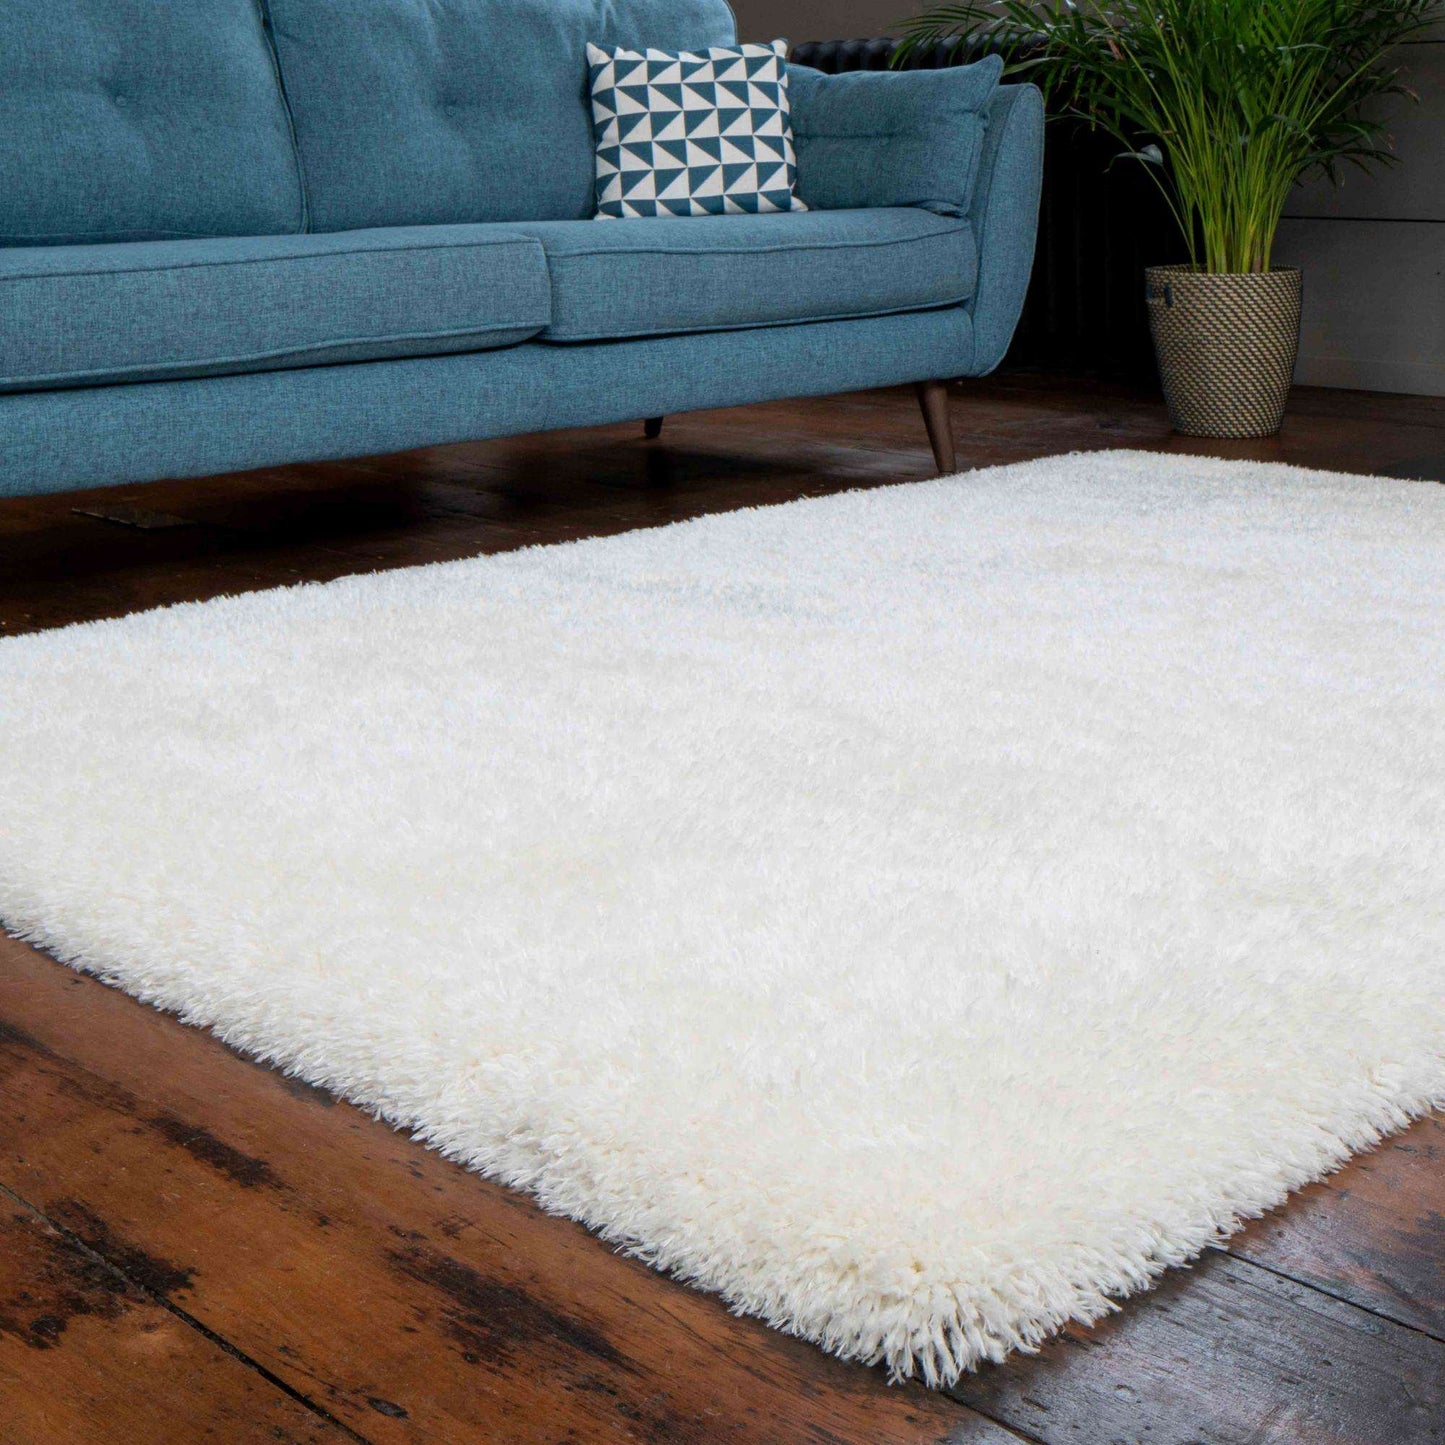 Deluxe Thick Soft Cream Shaggy Living Room Rug